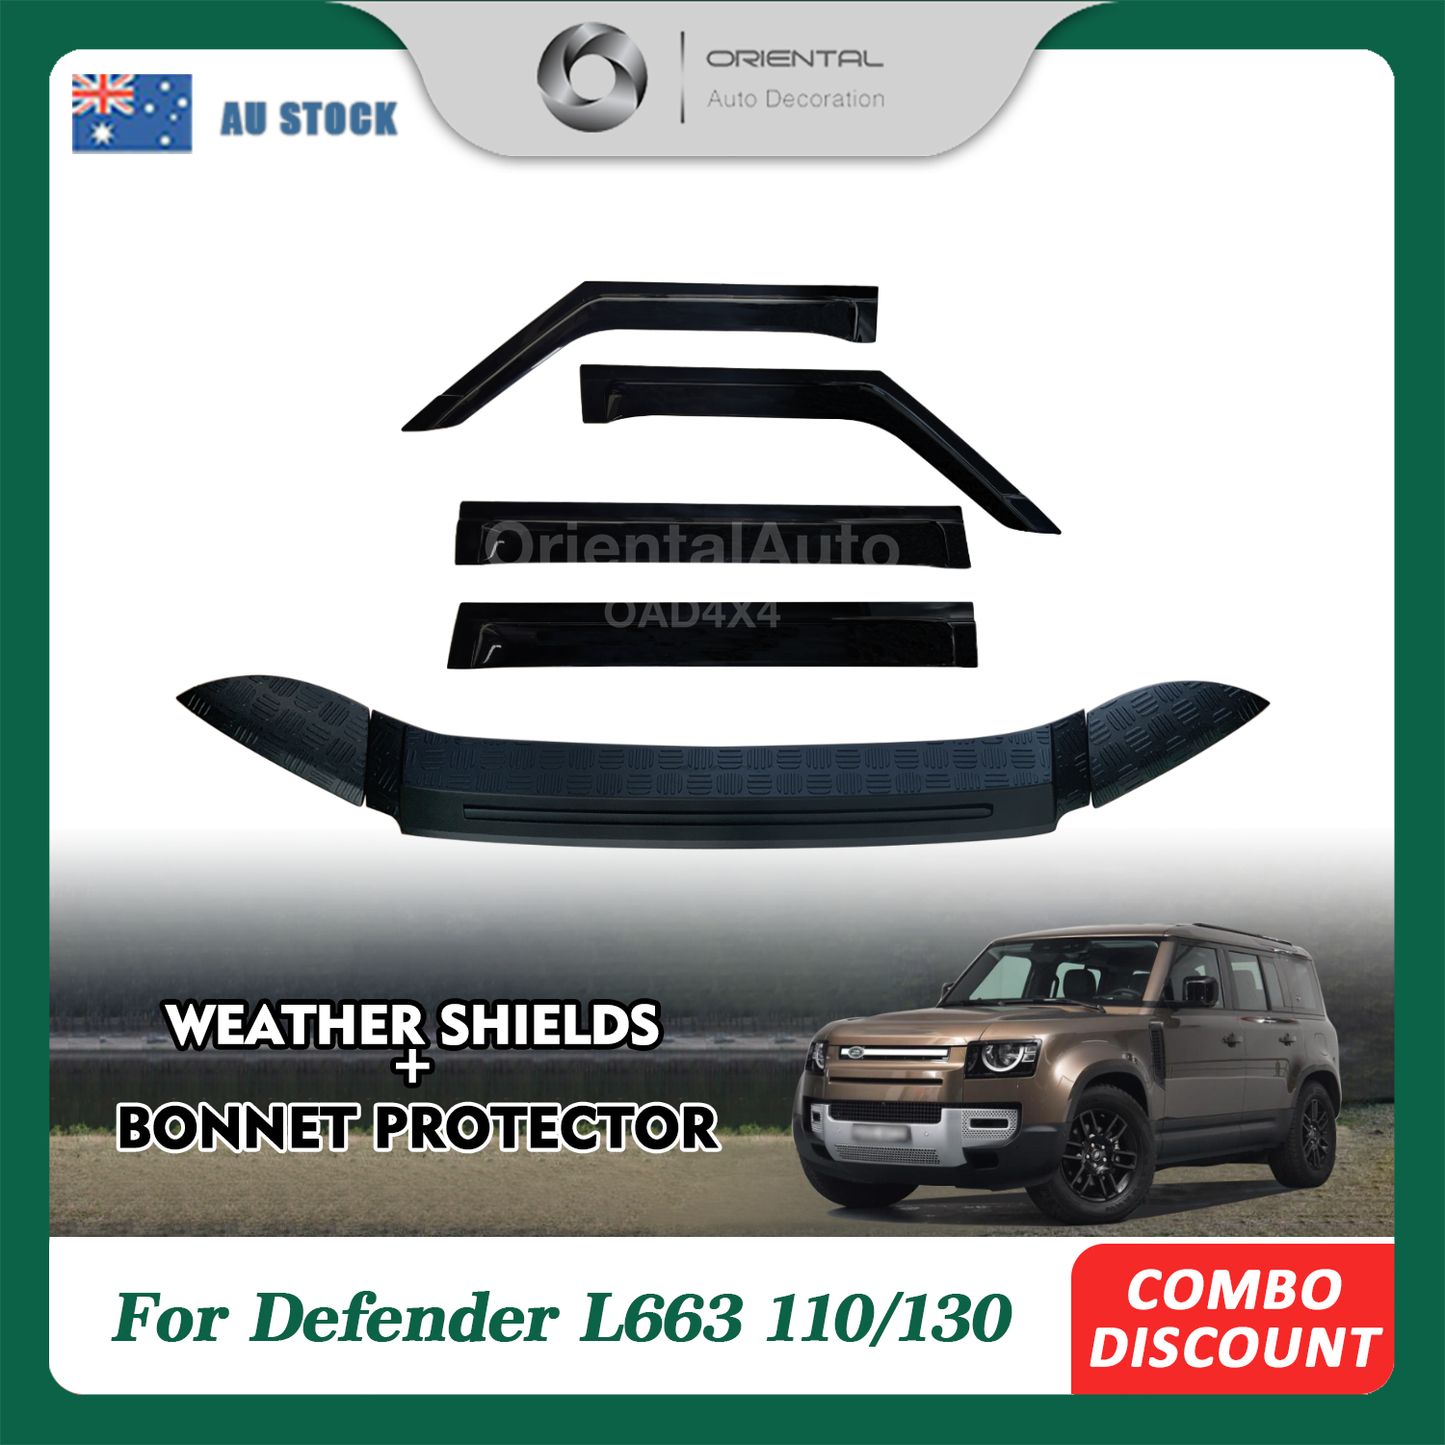 Injection Modeling Bonnet Protector & Luxury Weathershield 4pcs for Land Rover Defender L663 110 / 130 2020+ Weather Shields Window Visor Hood Protector Guard